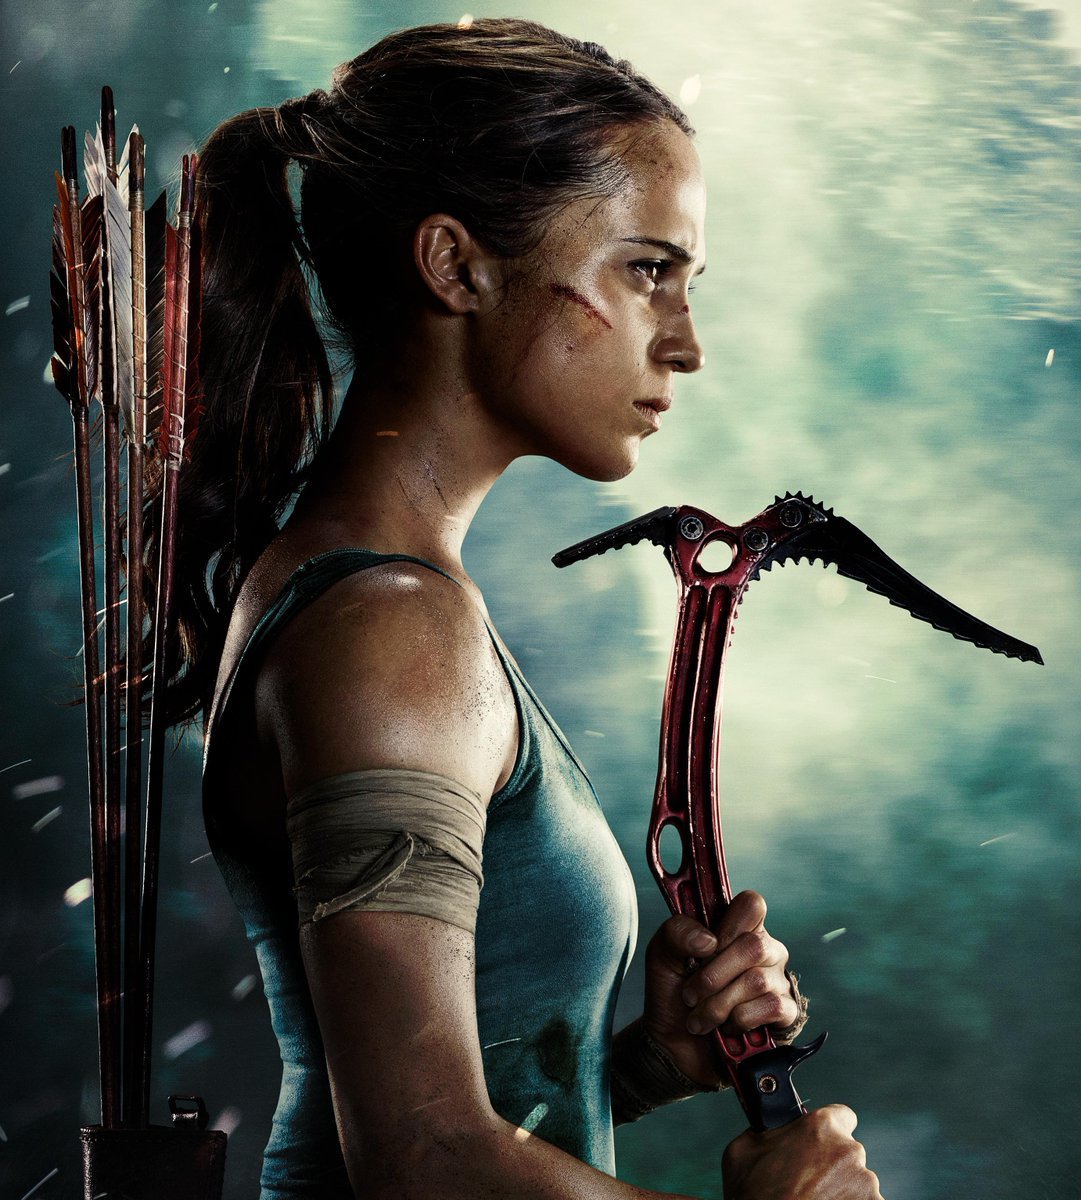 Tomb Raider star Alicia Vikander has confirmed a second Tomb Raider motion picture is still in progress during an interview with Wilson Morales from  BlackFilmandTV. #tombraidermovie #aliciavikander tombraiderchronicles.com/headlines4317.…